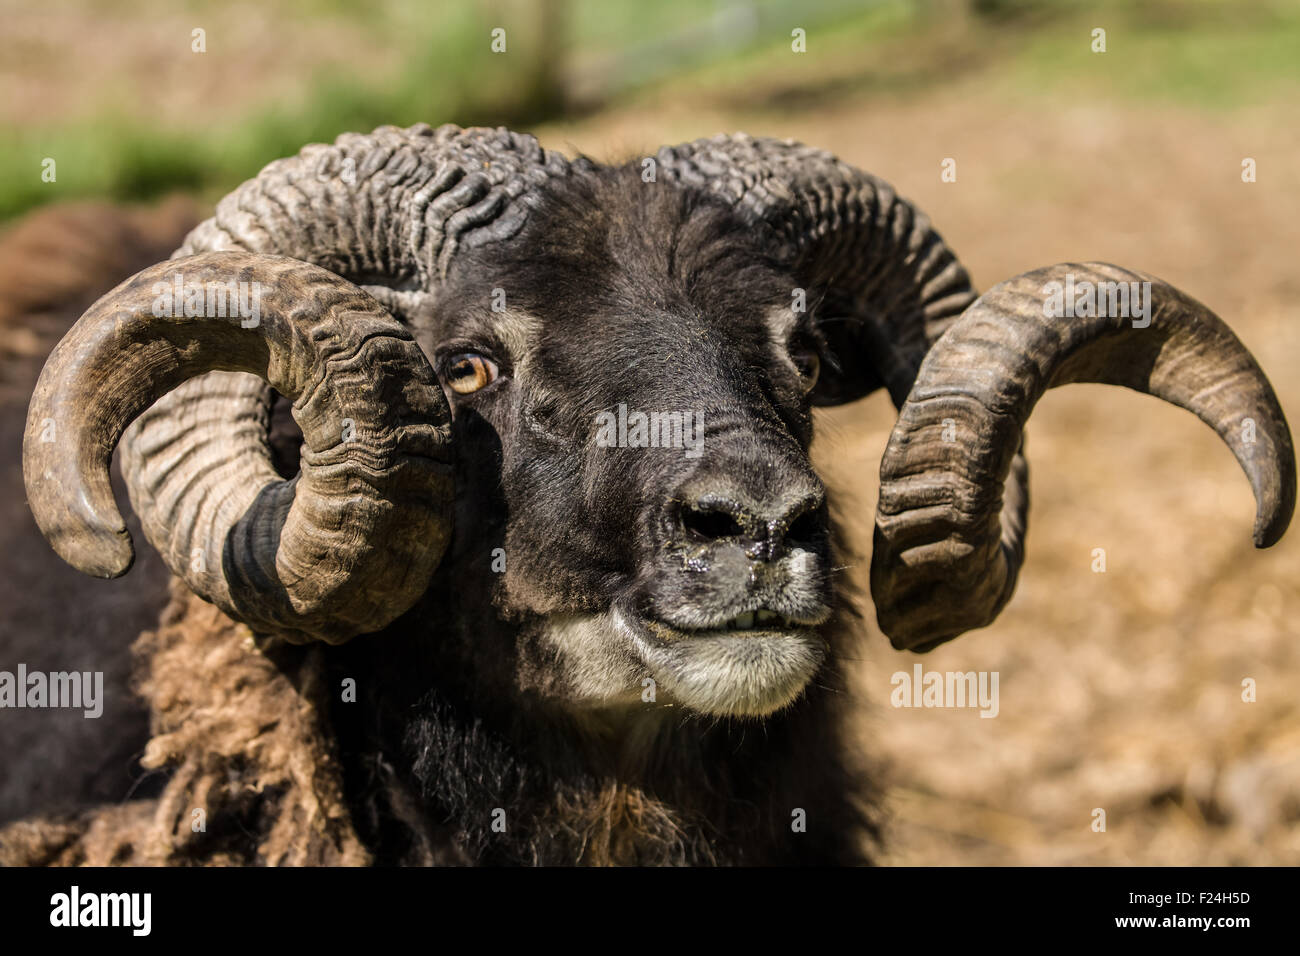 Icelandic heritage breed of sheep near Carnation, Washington, USA.  Their face and legs are free of wool. Stock Photo